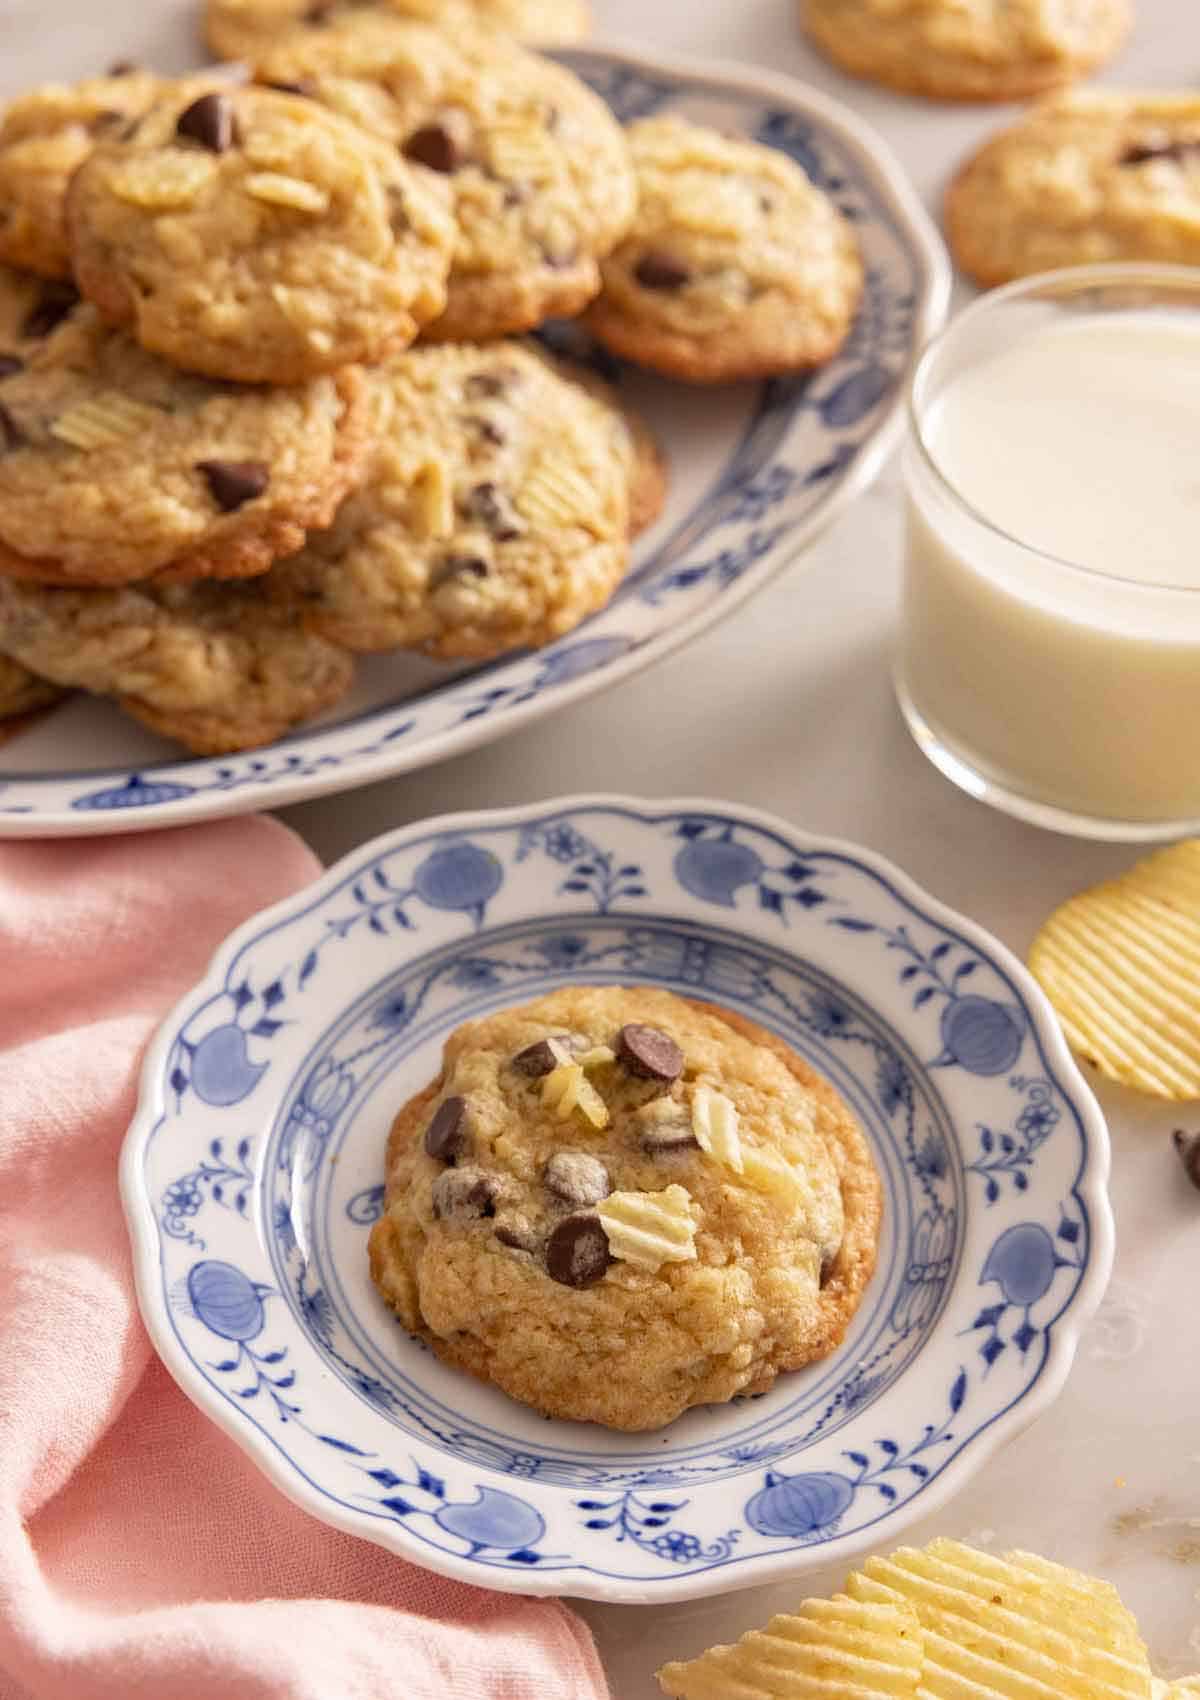 A potato chip cookie on a plate by a glass of milk and more cookies.